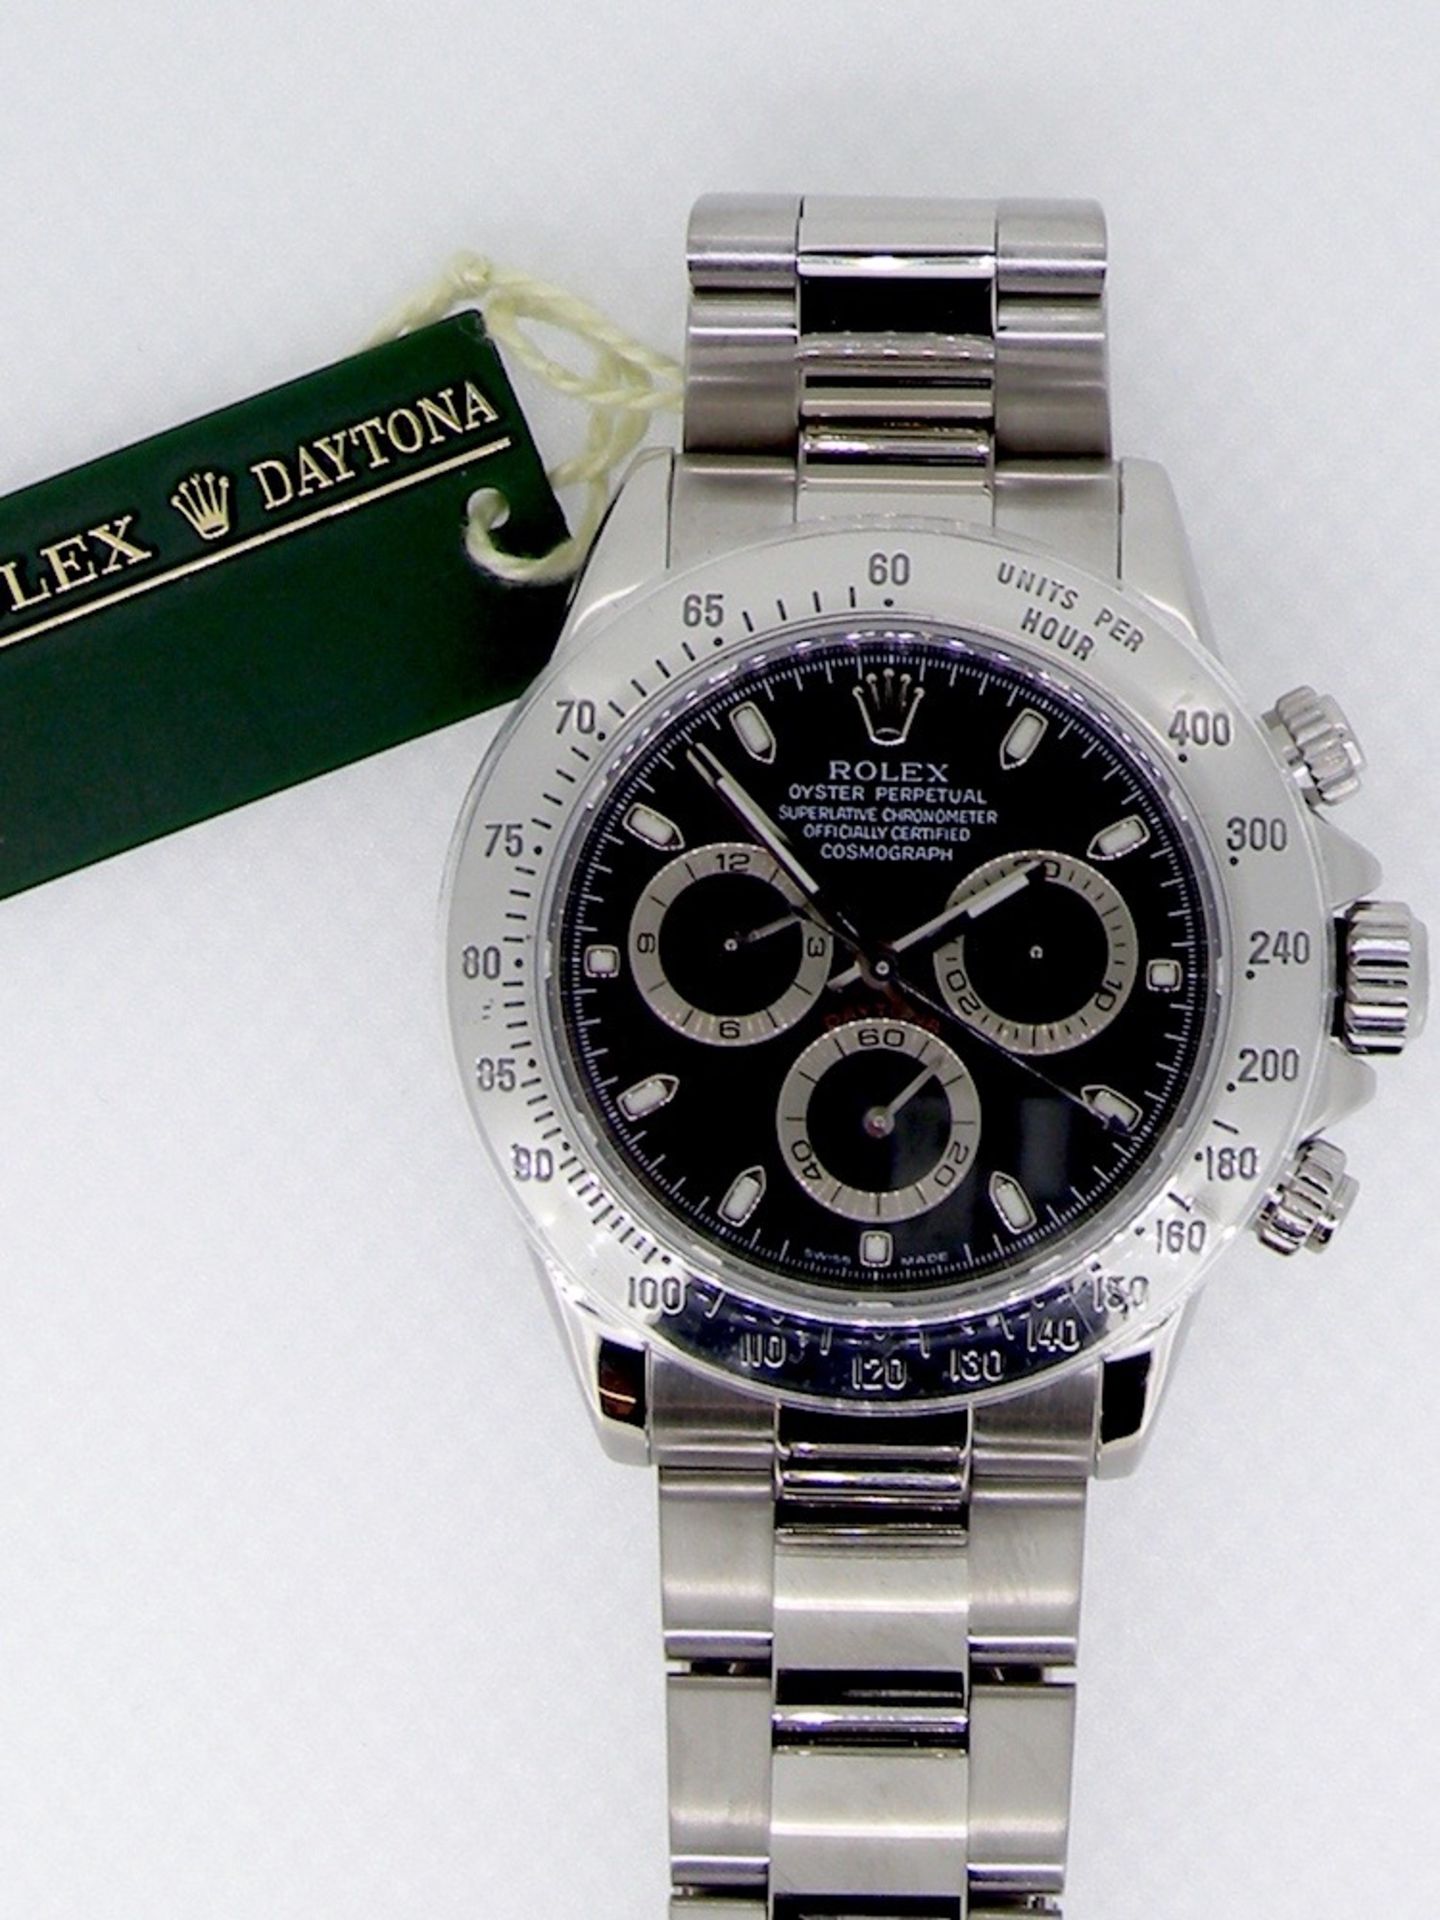 Gents Rolex Daytona Wrist Watch, With Box And Original Papers